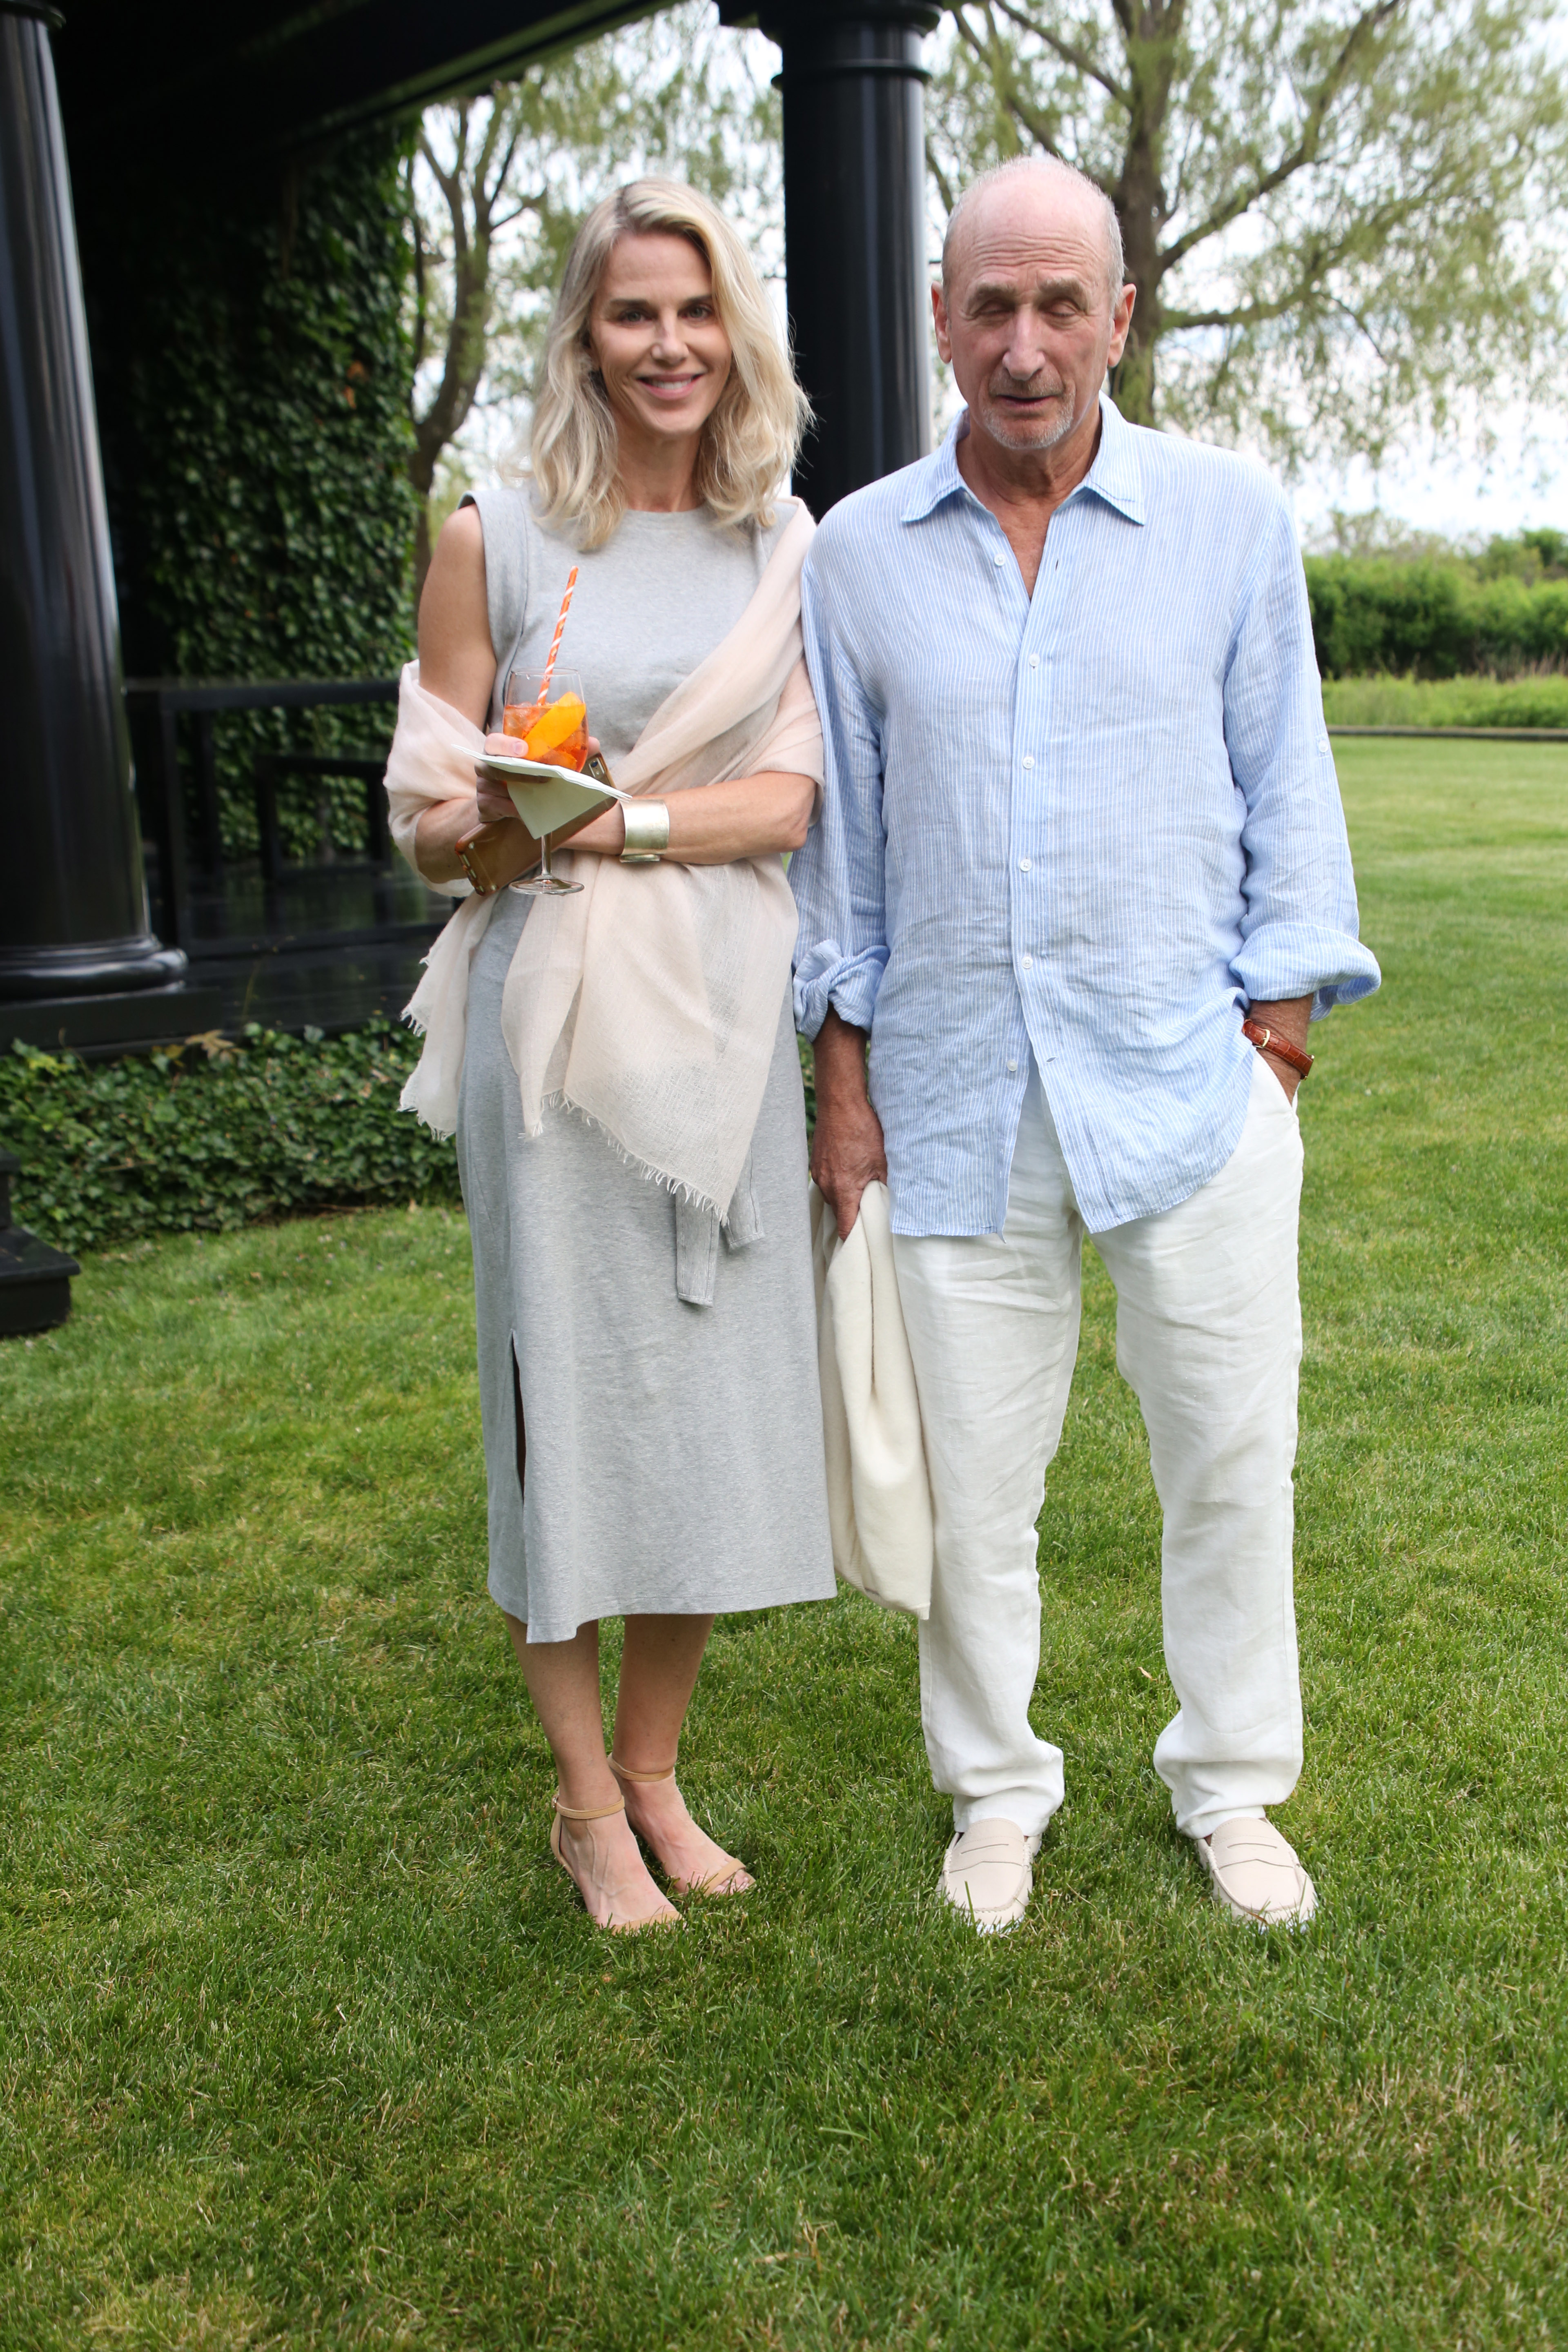 Kristin Kehrberg and Dick Tarlow at the Midsummer Night Drinks event to benefit God's Love We Deliver on June 9, 2018, in Watermill, New York | Source: Getty Images